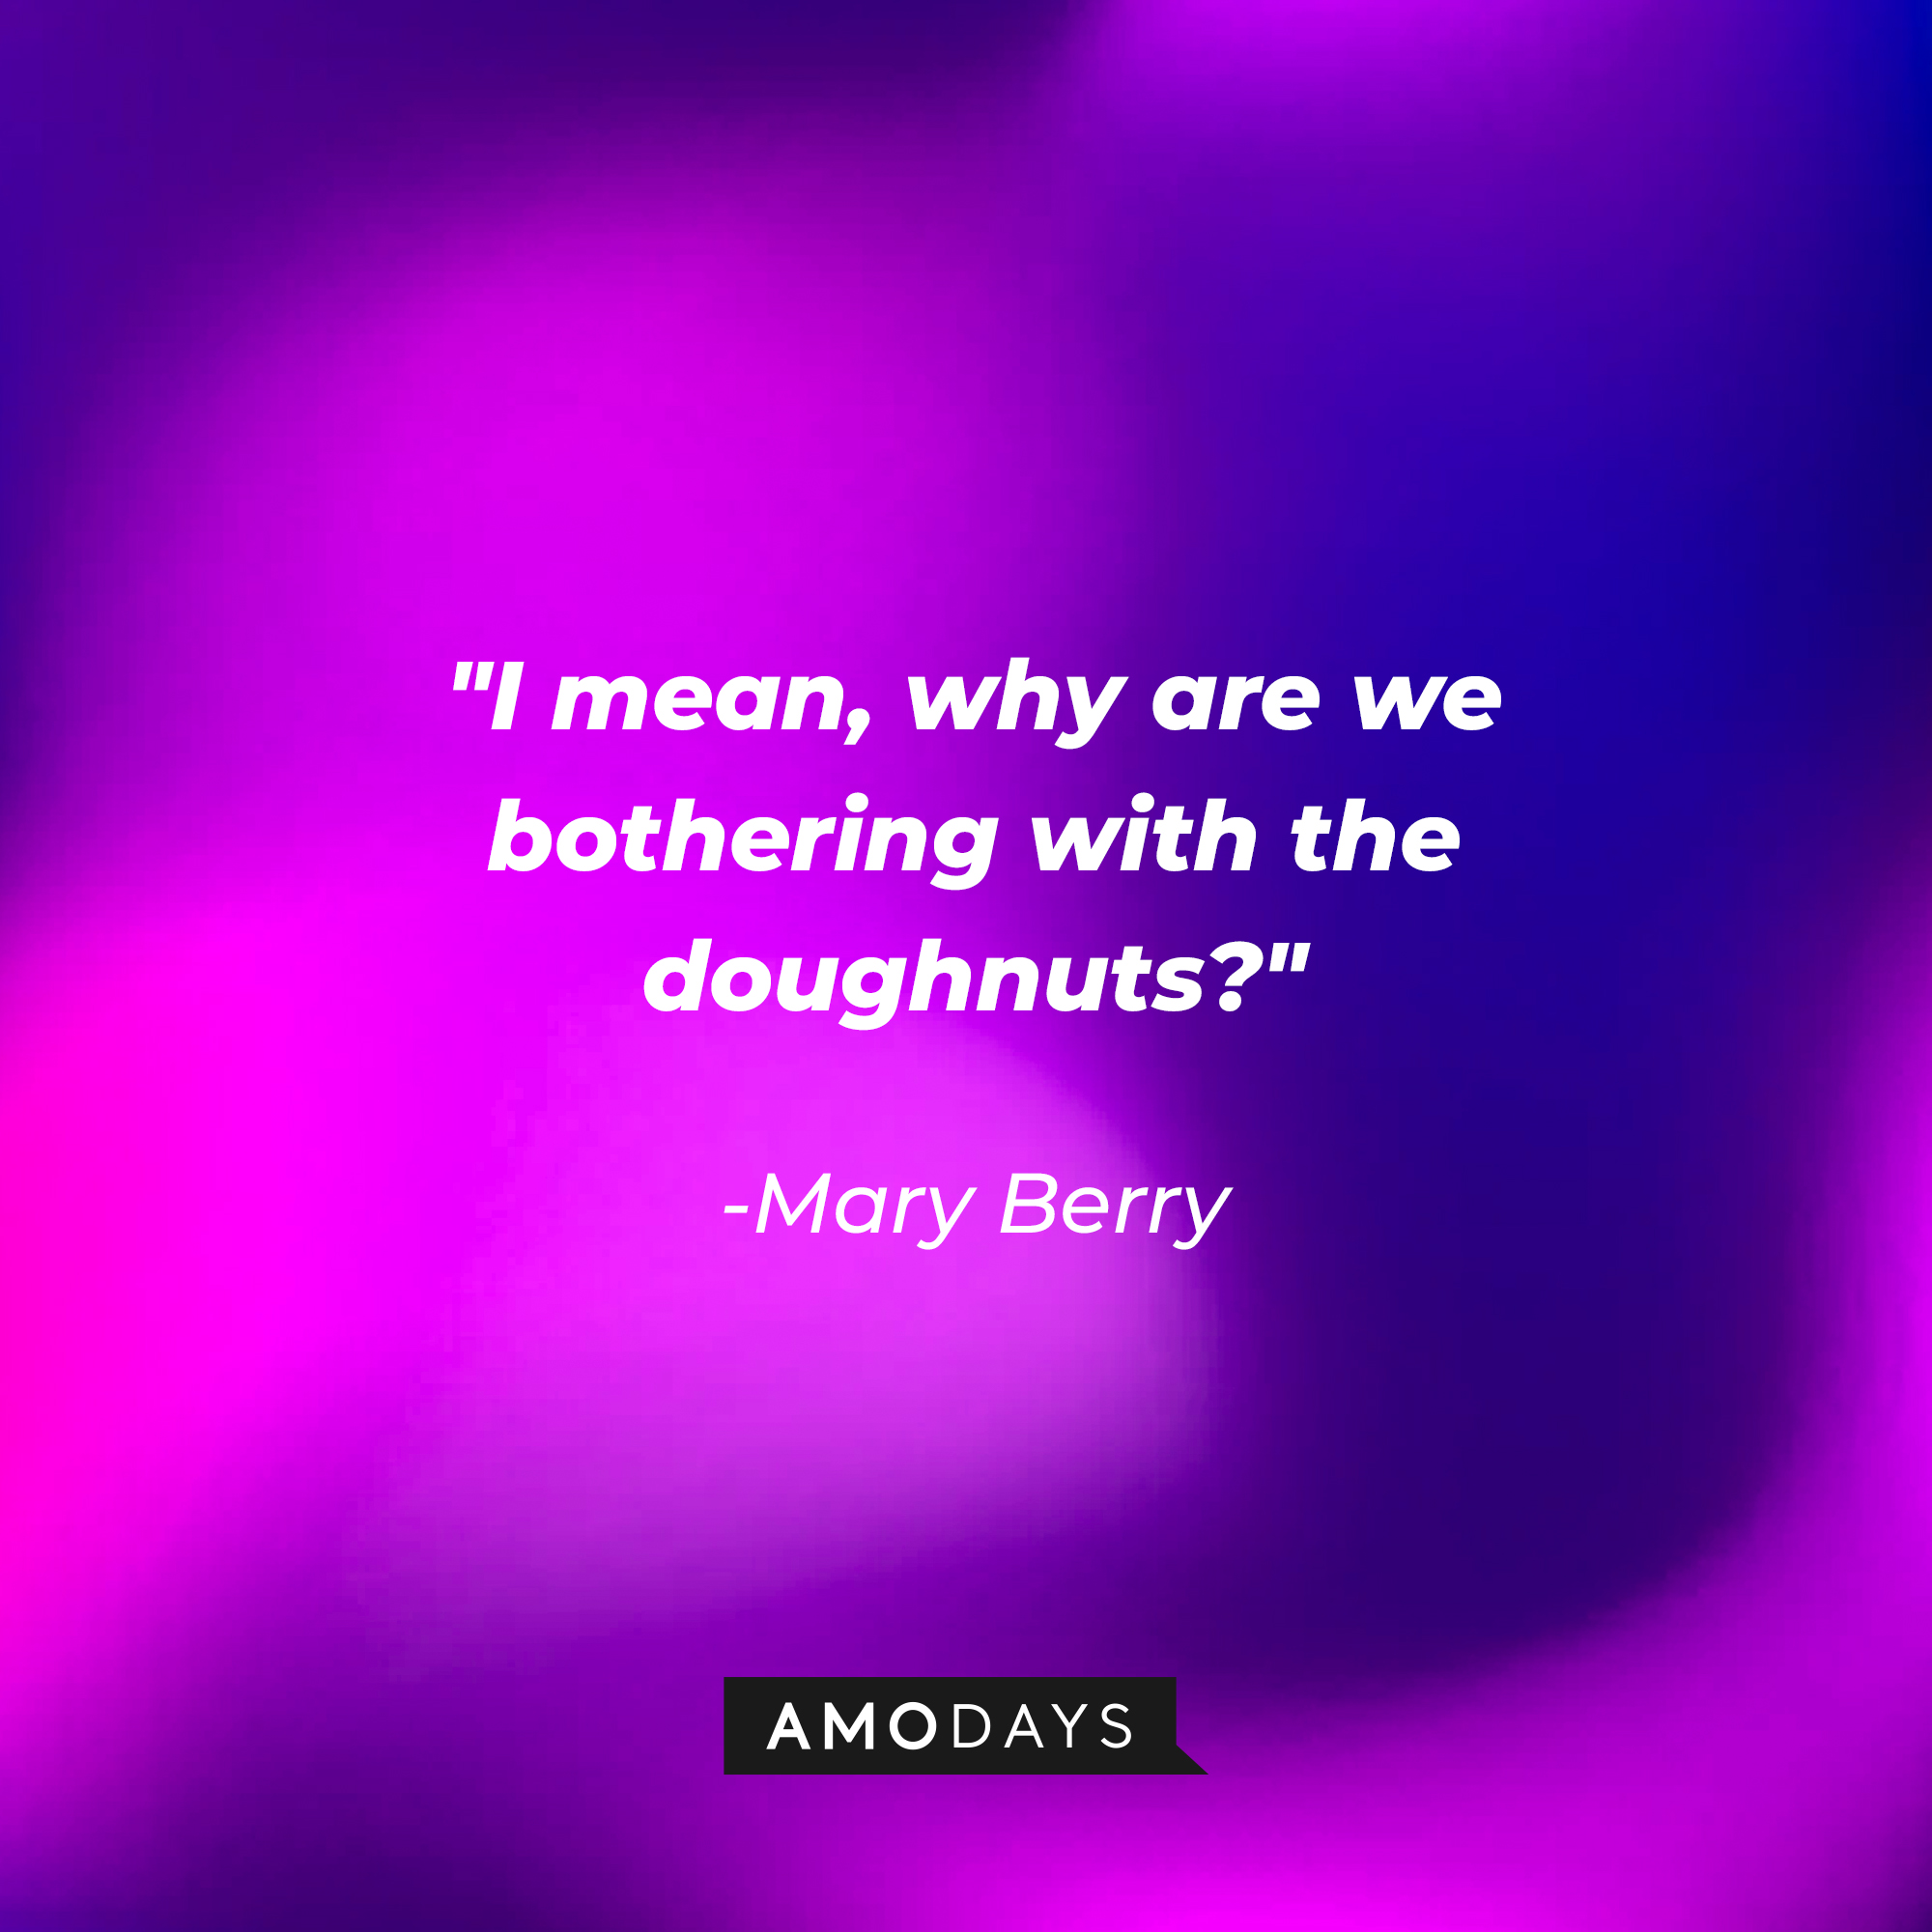 Mary Berry's quote: "I mean, why are we bothering with the doughnuts?" | Image: AmoDays